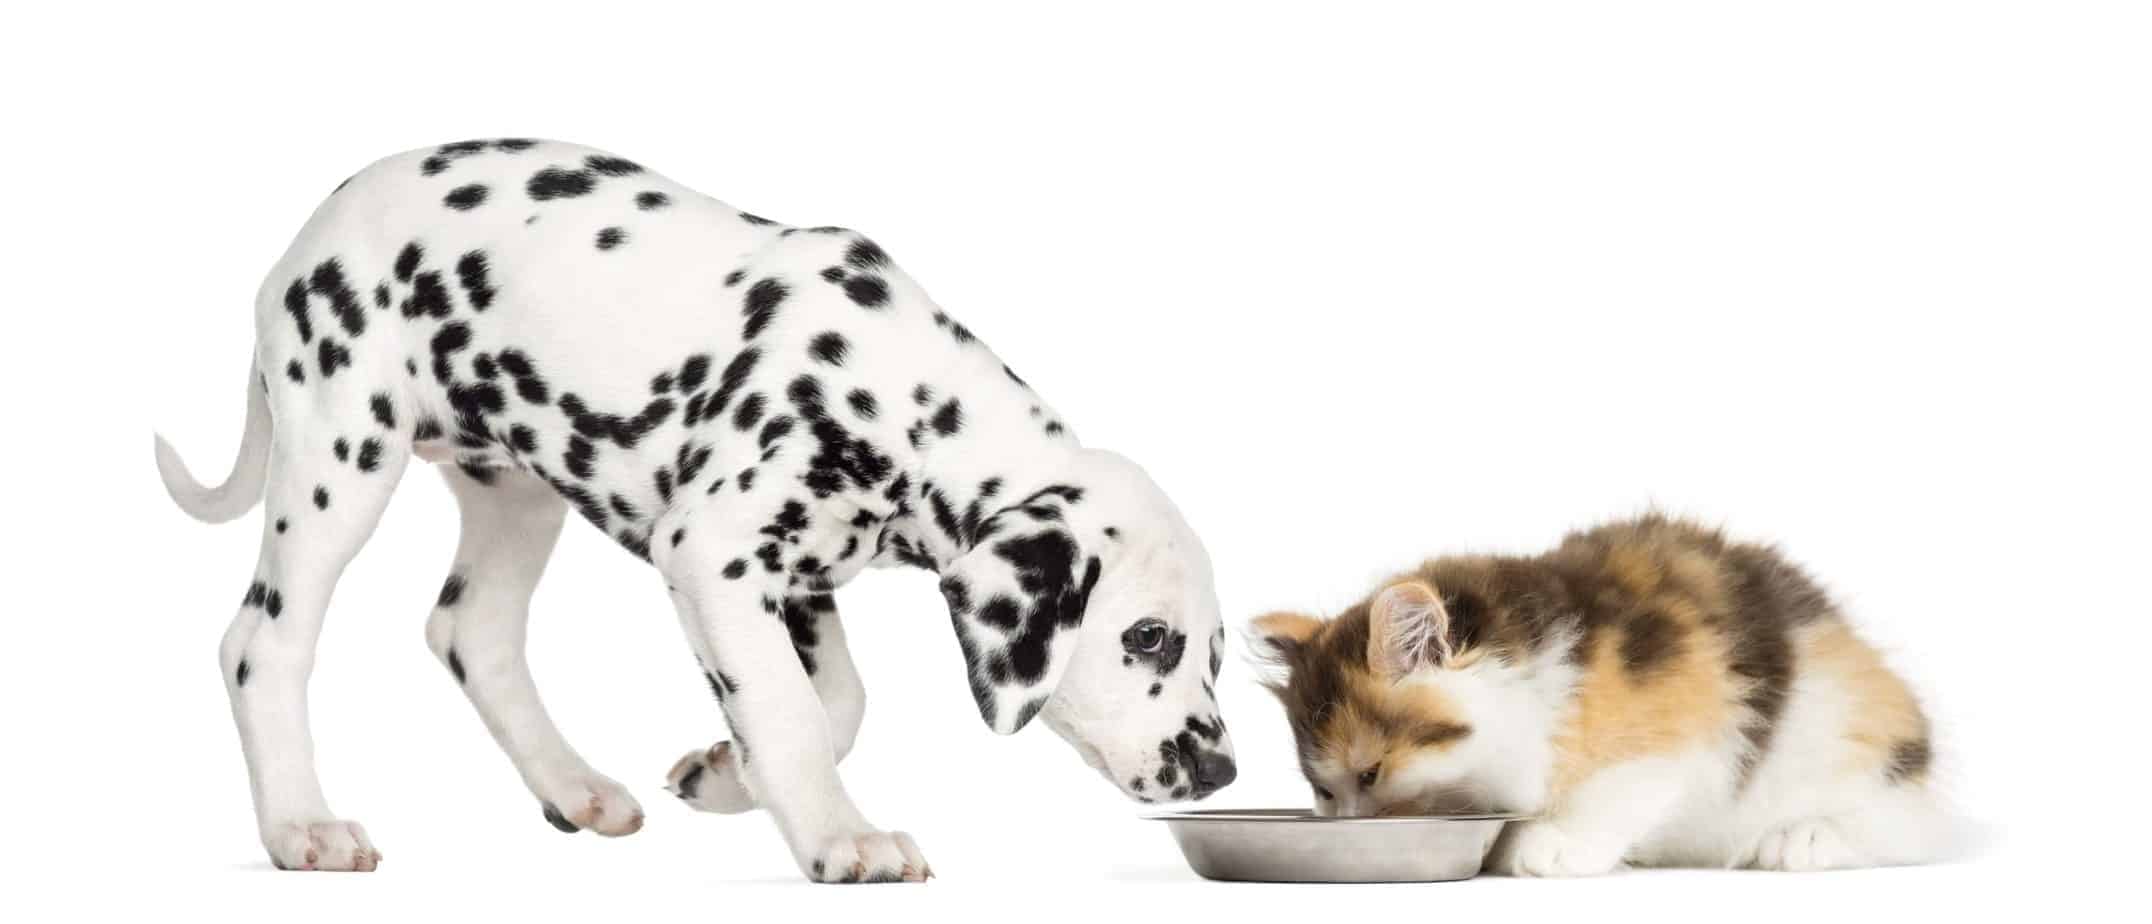 Stop cats from eating dog food: Eliminate access, use automatic feeders